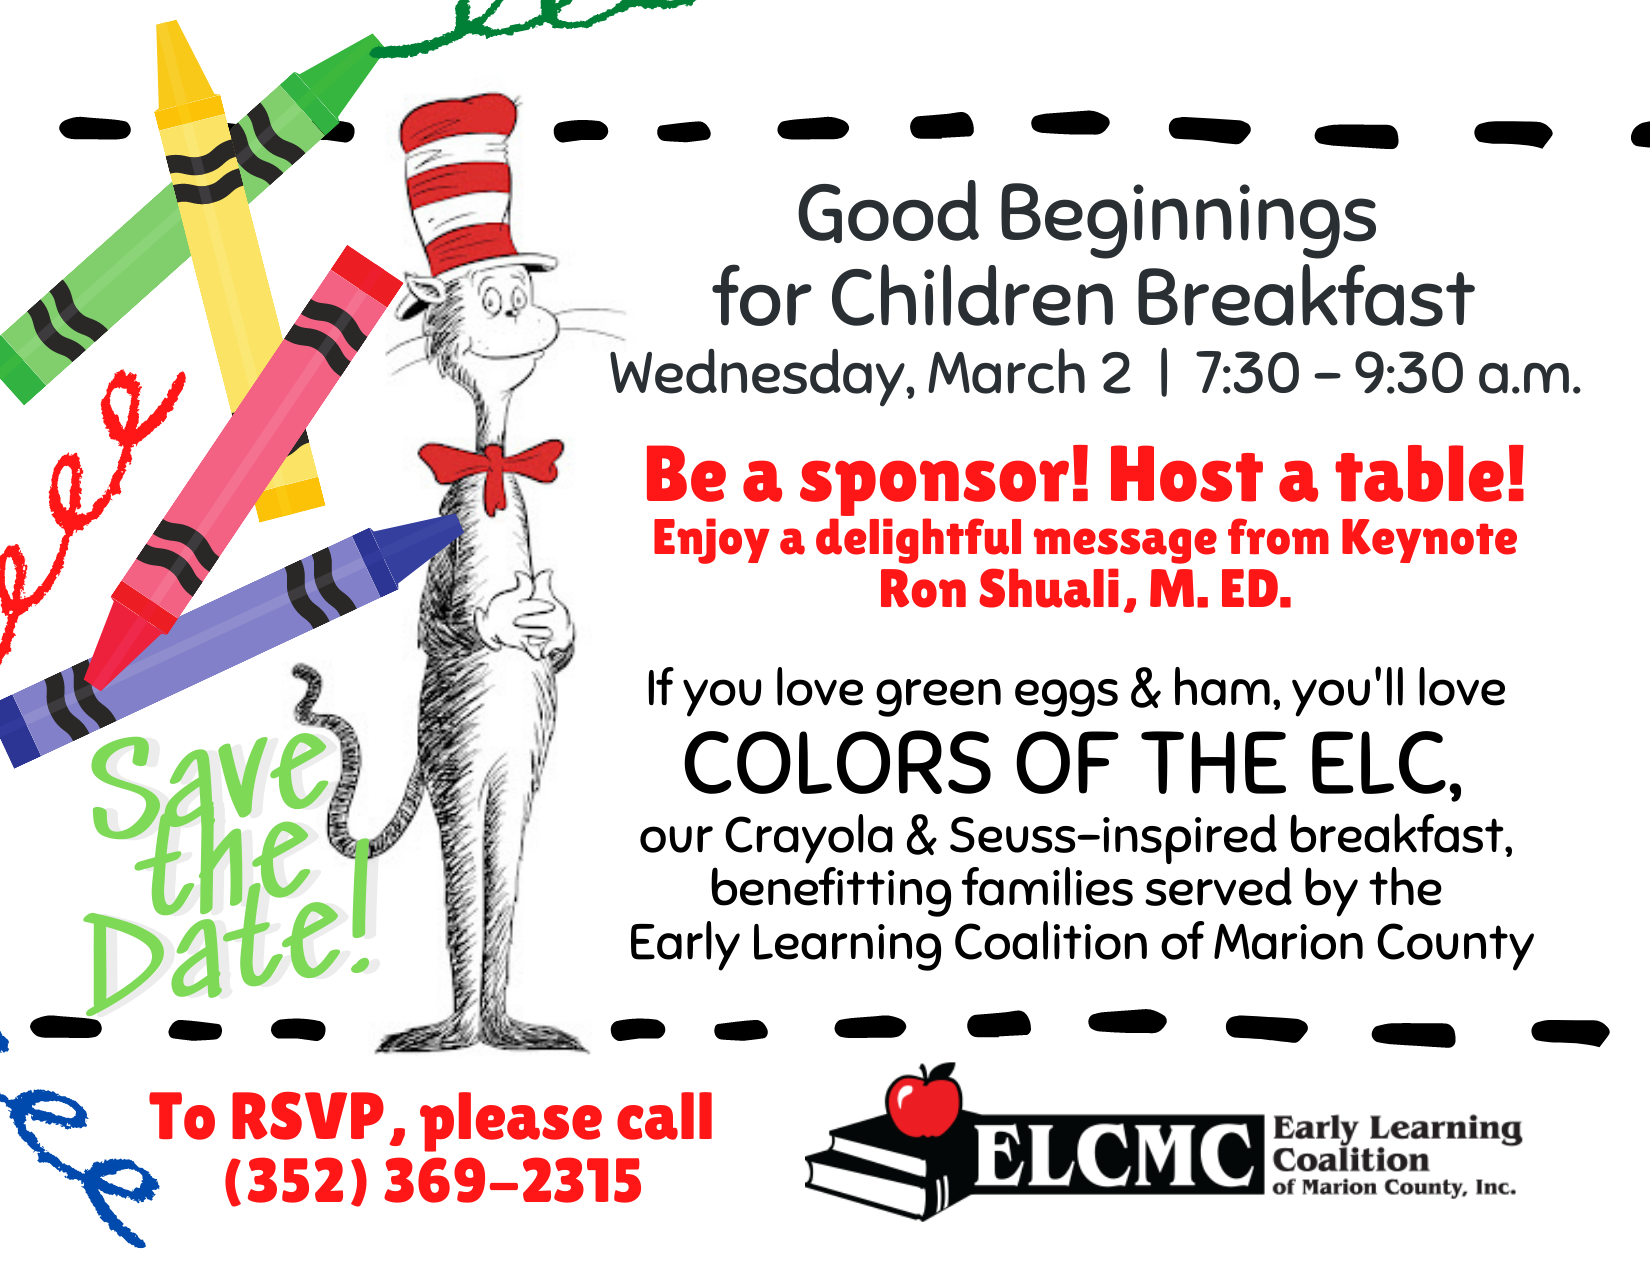 save the date card with breakfast details, crayons and Cat in the Hat Cartoon